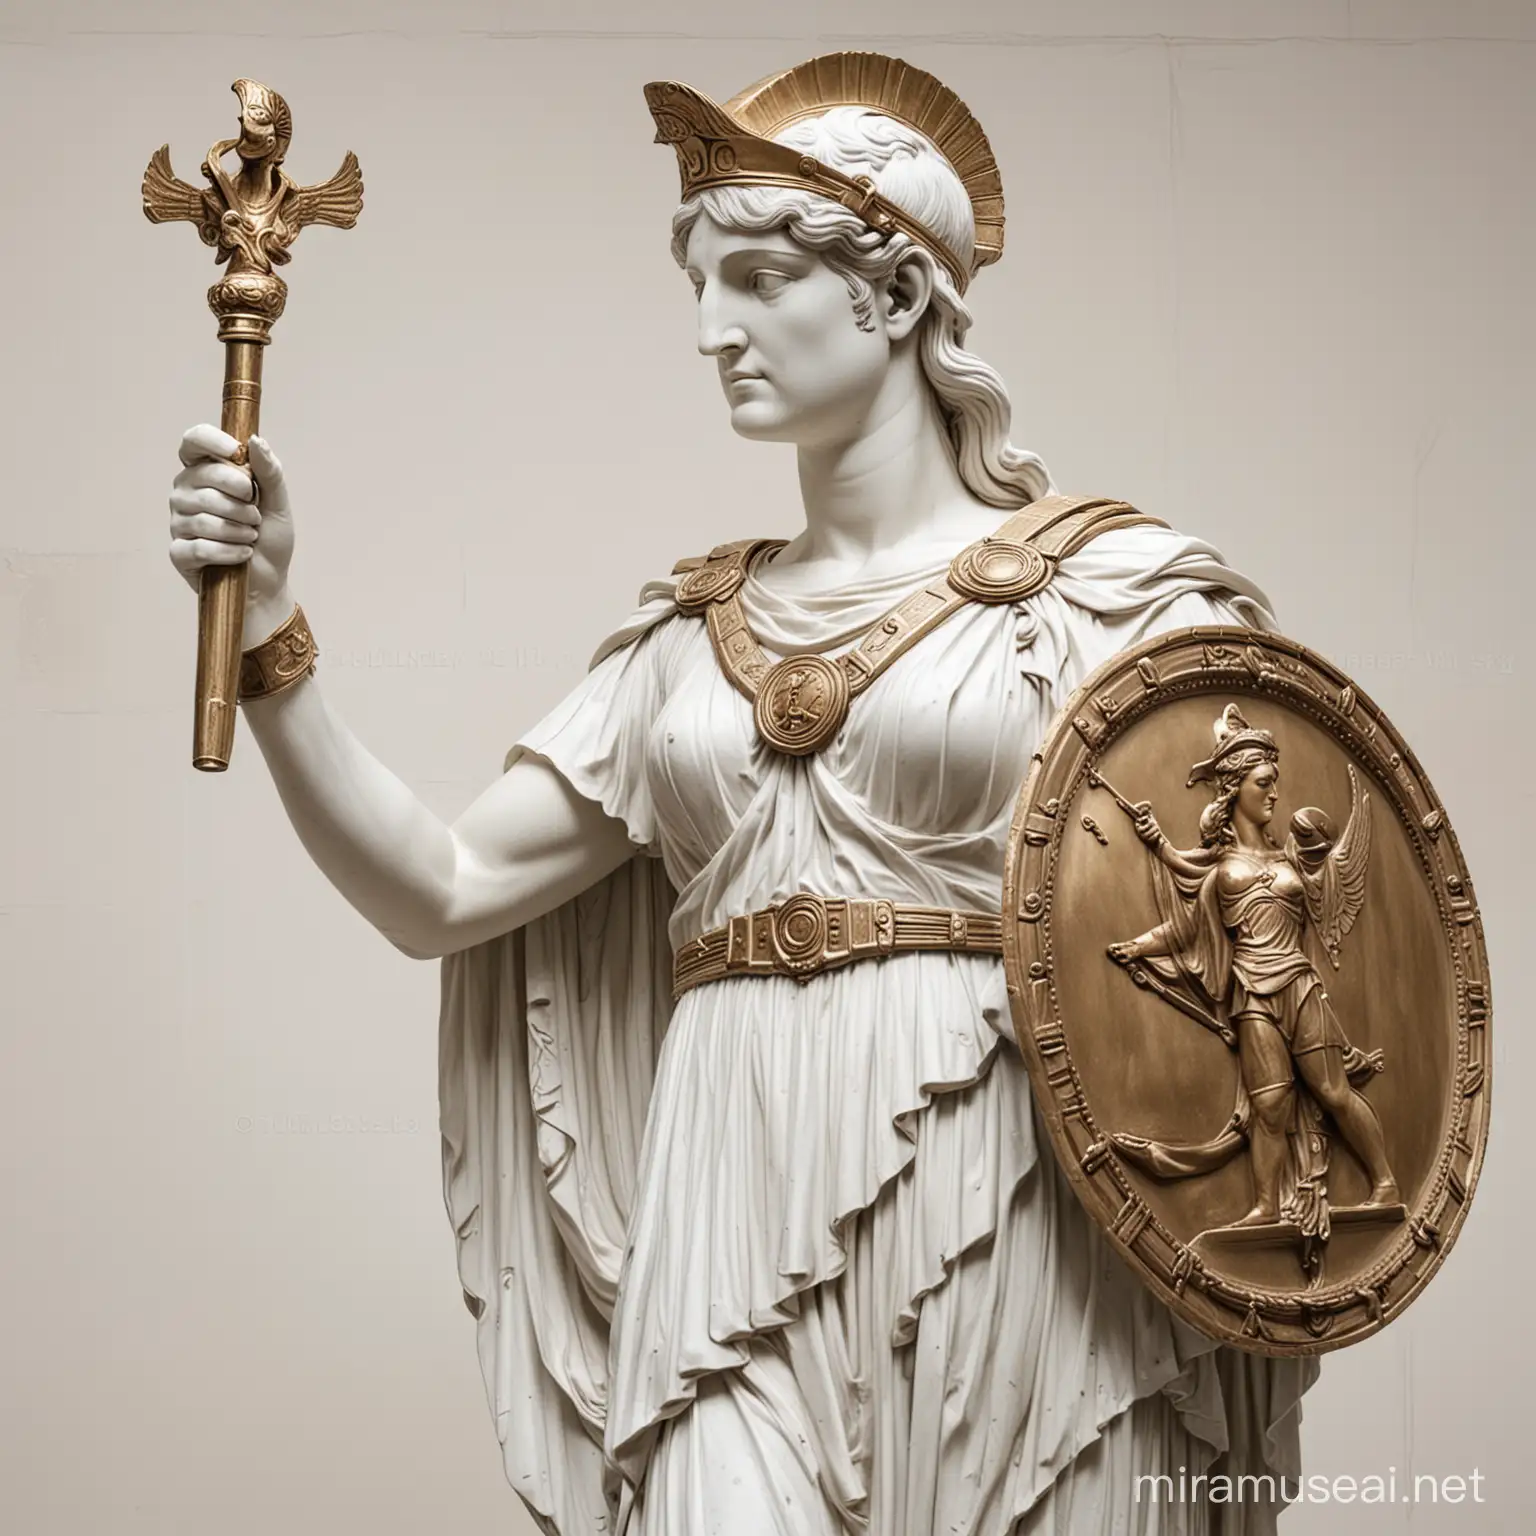 statue of Athena holding shield, background is white